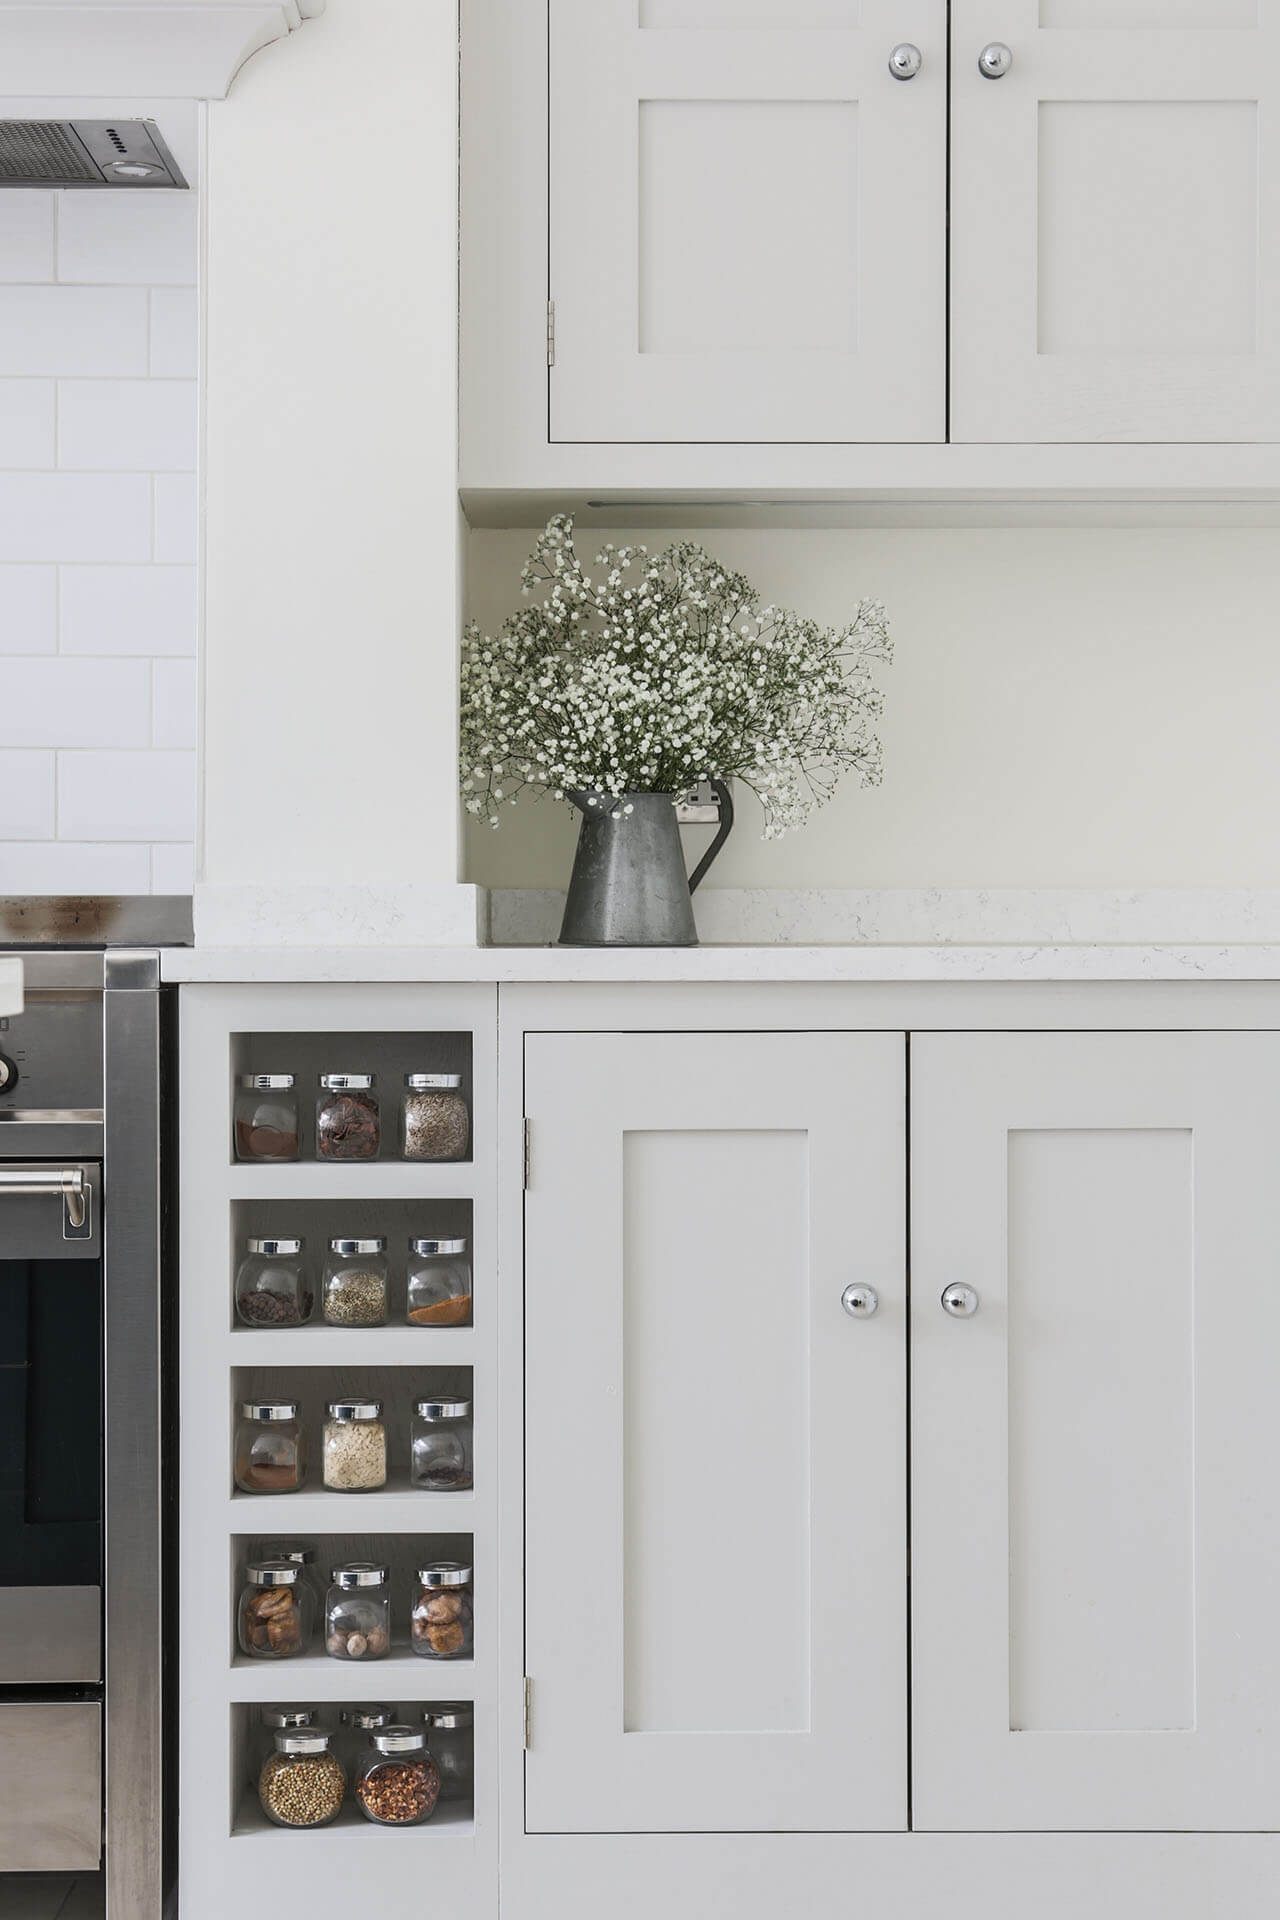 Open plan white Shaker kitchen with bespoke spice rack and Farrow & Ball Ammonite painted cabinets